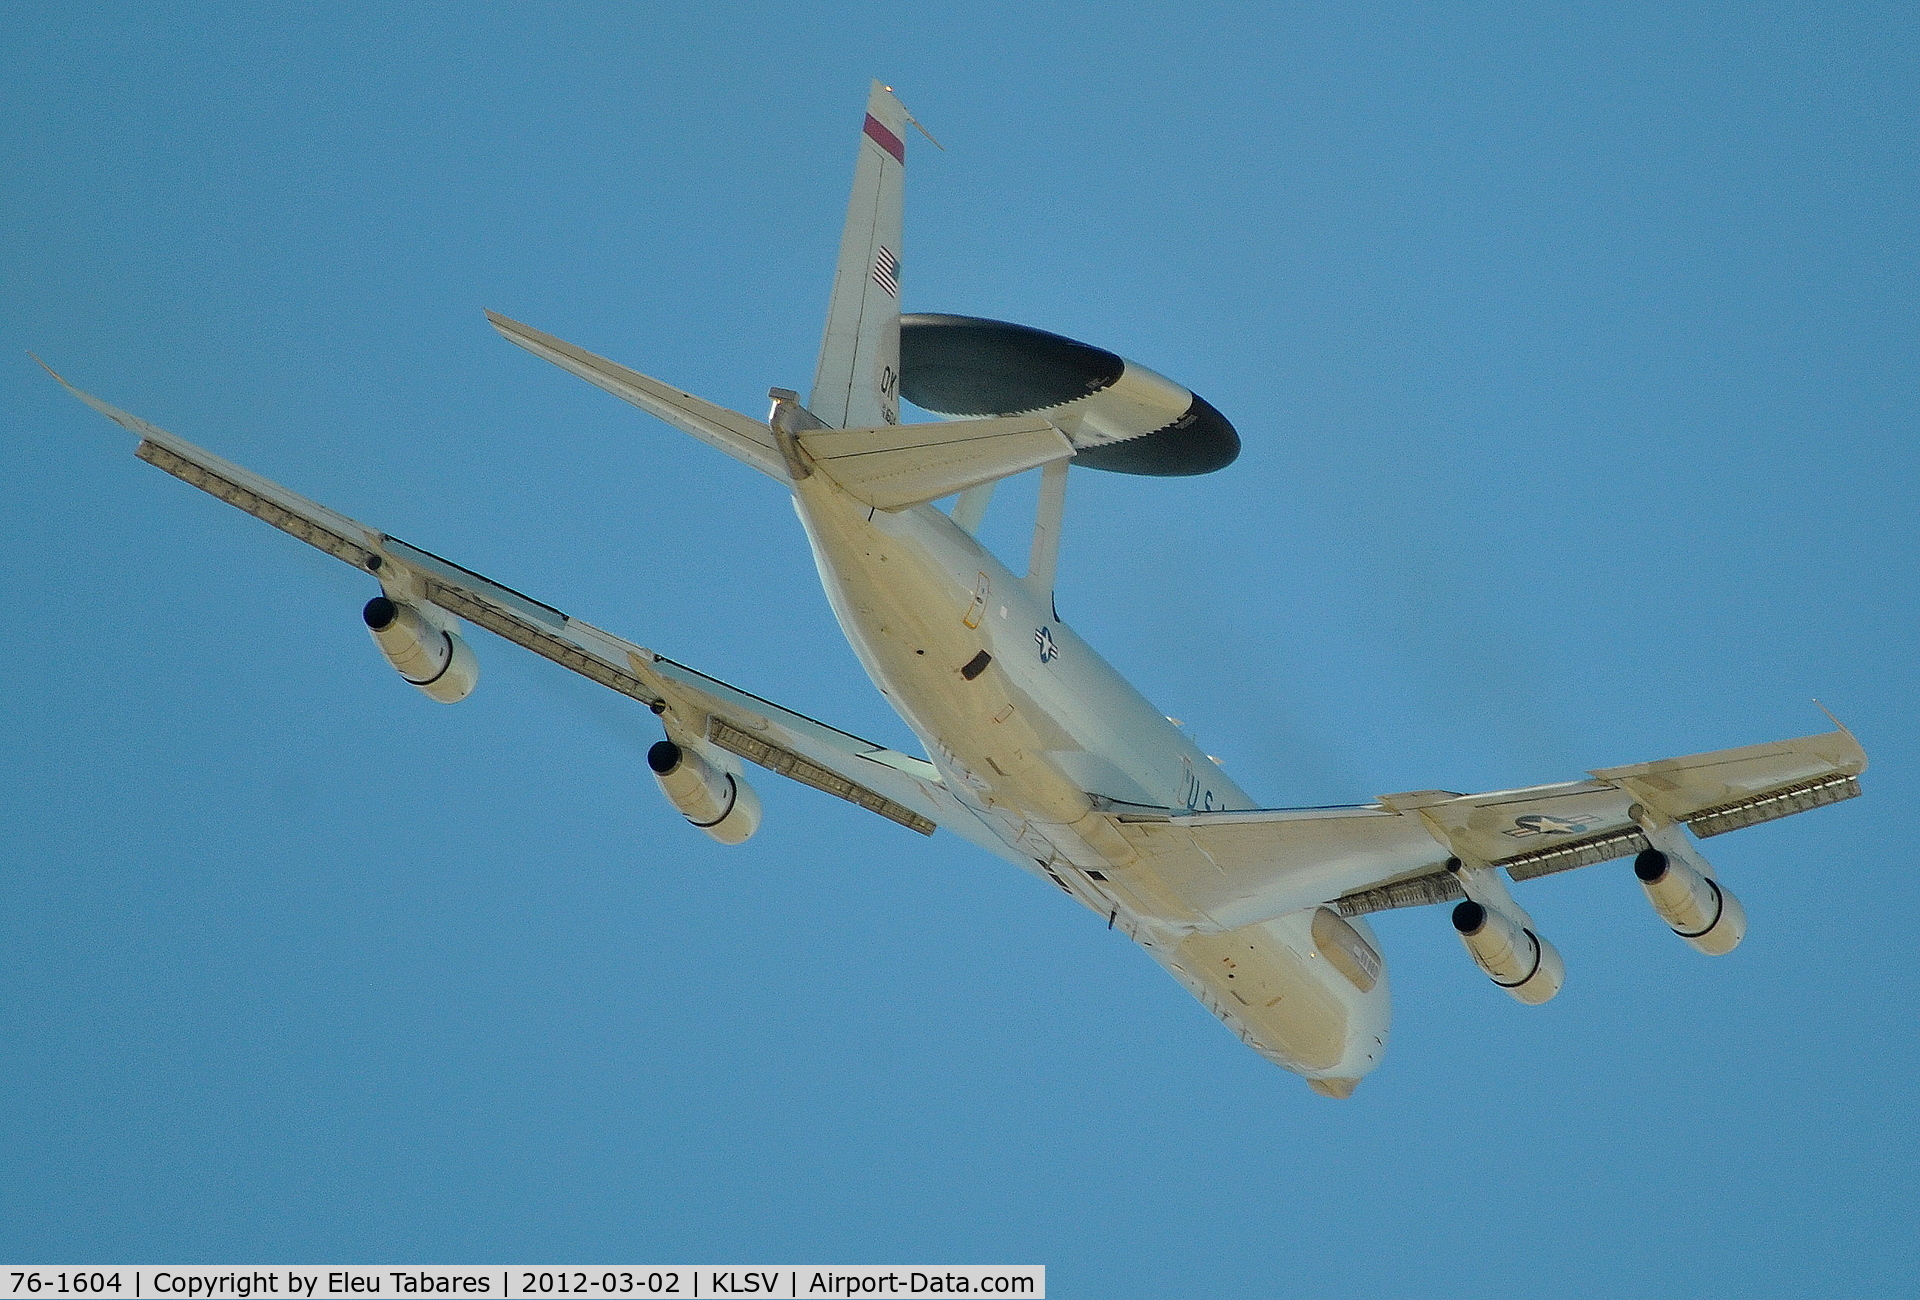 76-1604, 1976 Boeing E-3B Sentry C/N 21434, Taken during Red Flag Exercise at Nellis Air Force Base, Nevada.